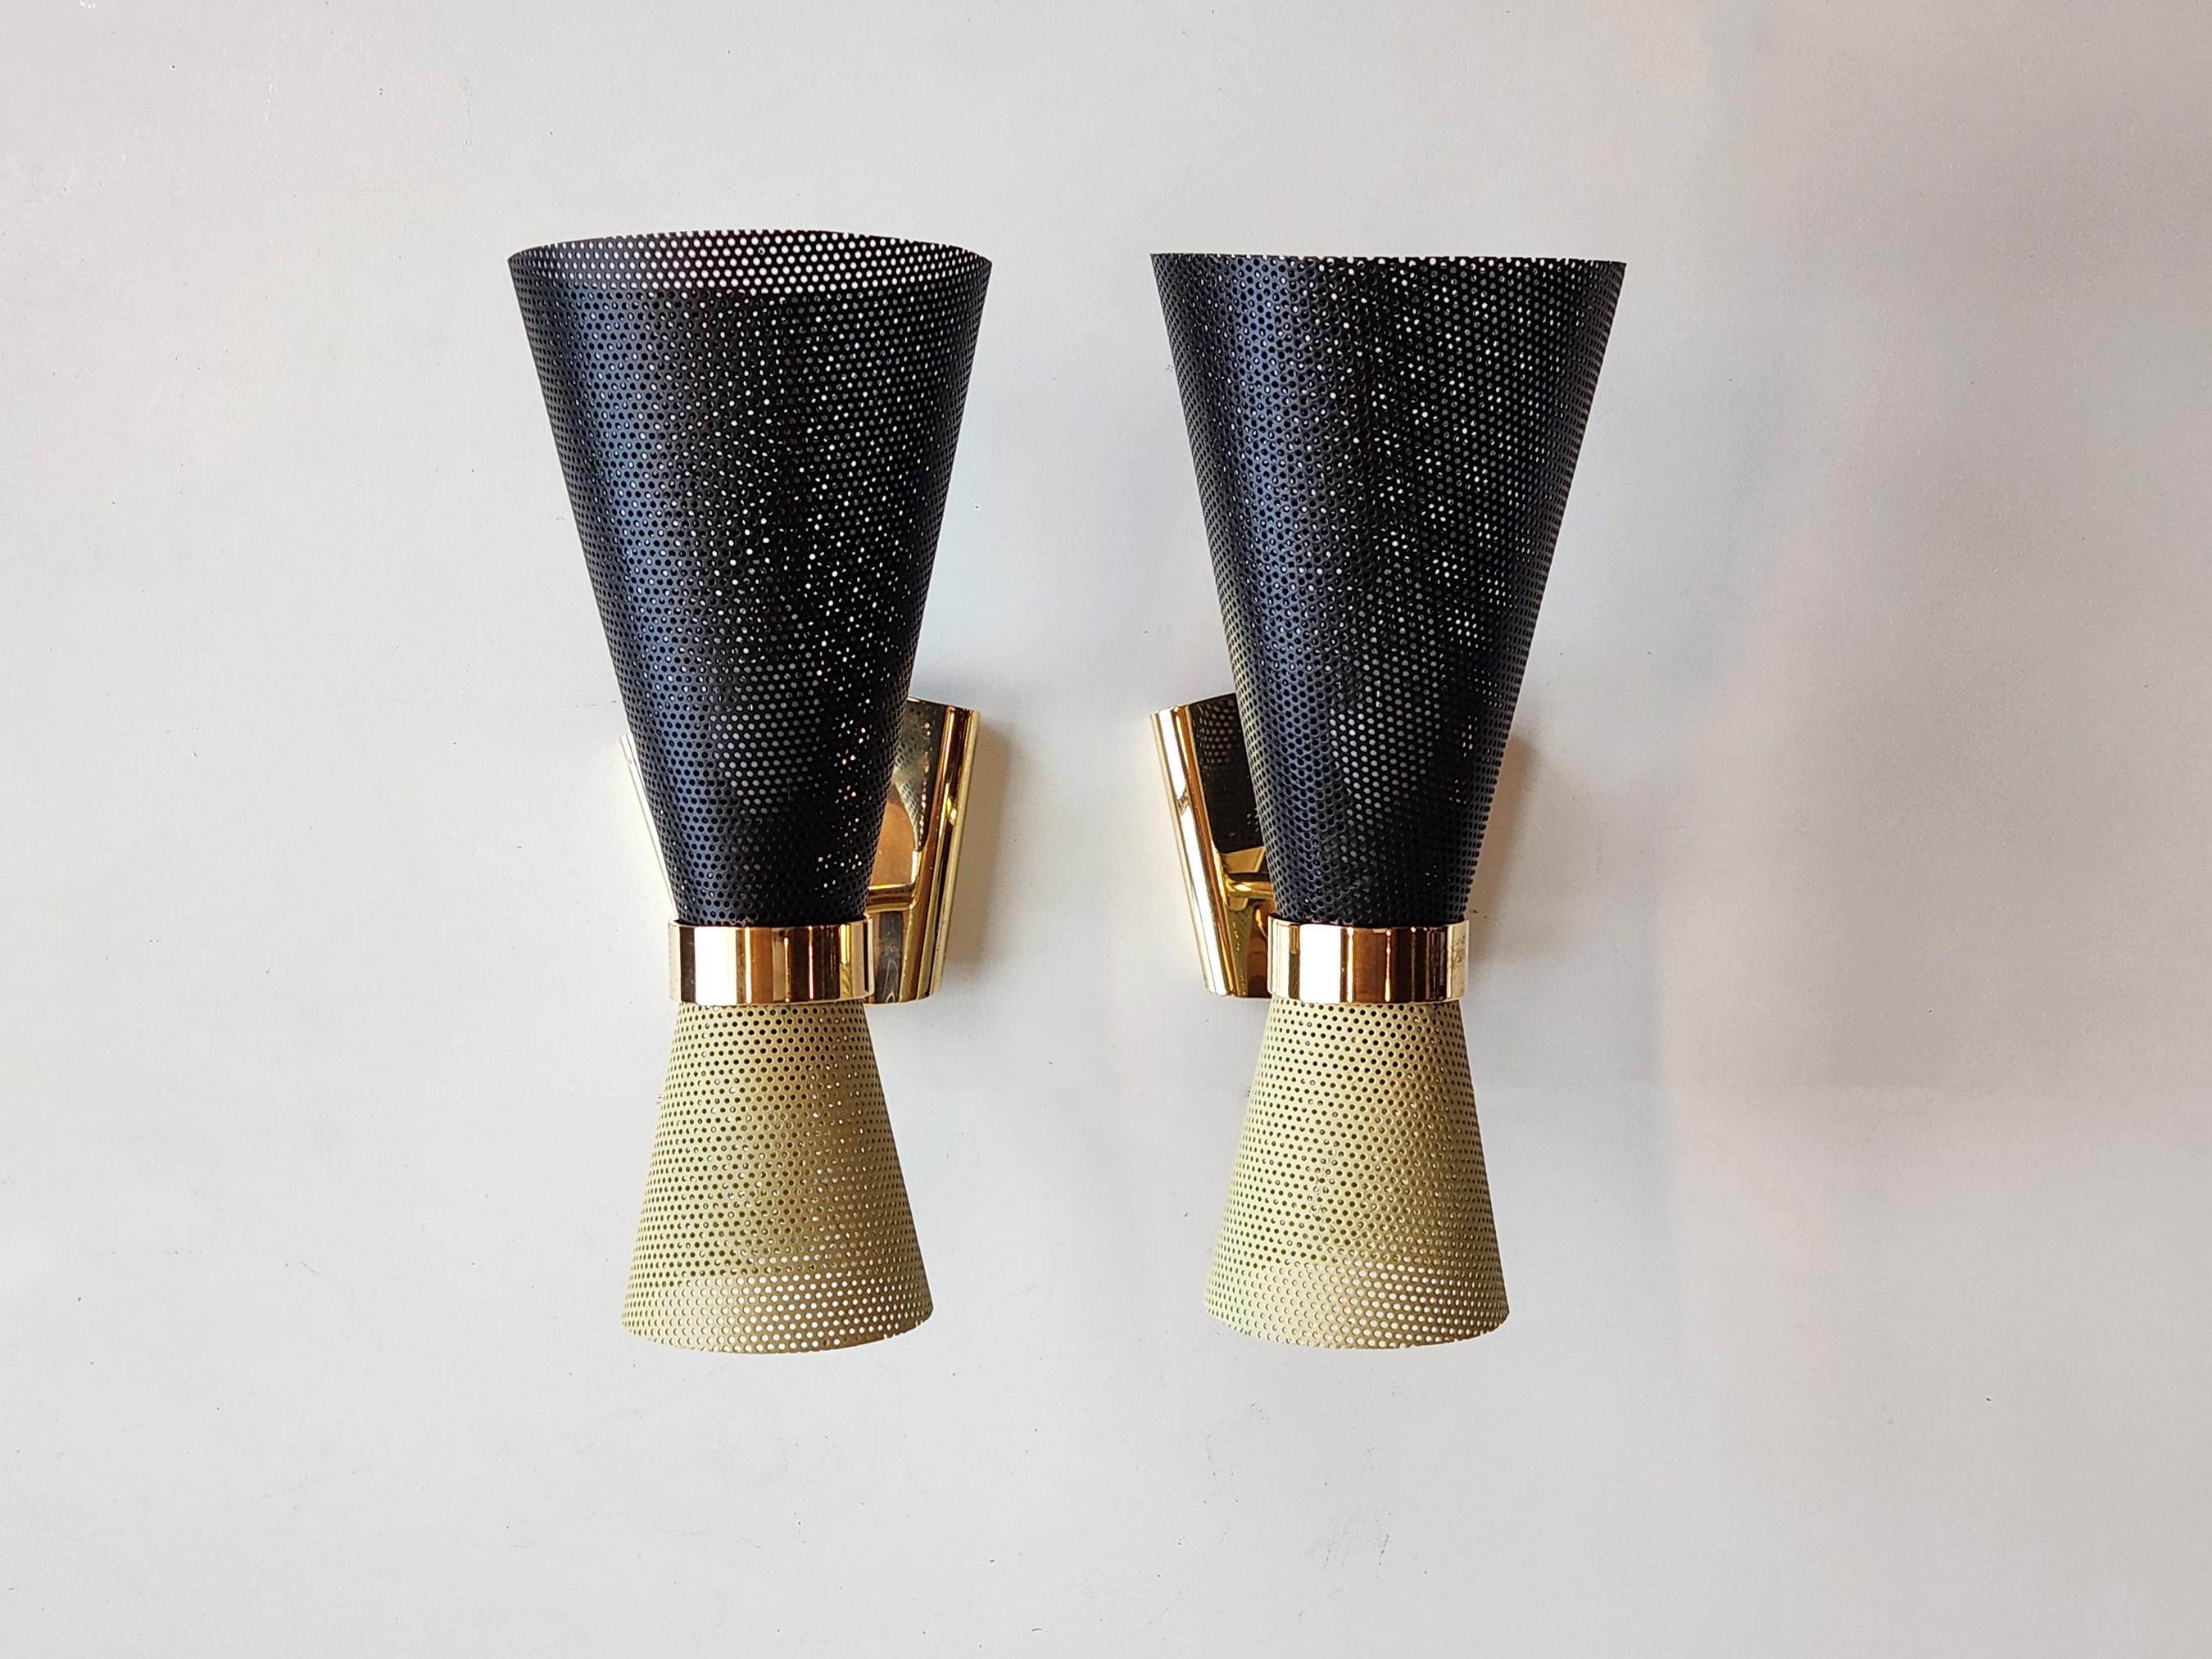 Very rare and exquisite sconces from the artist.

Two perforated metal shades joined together by a solid brass ring. The brass ring is fixed to the arm which connects the fixture to a brass canopy.